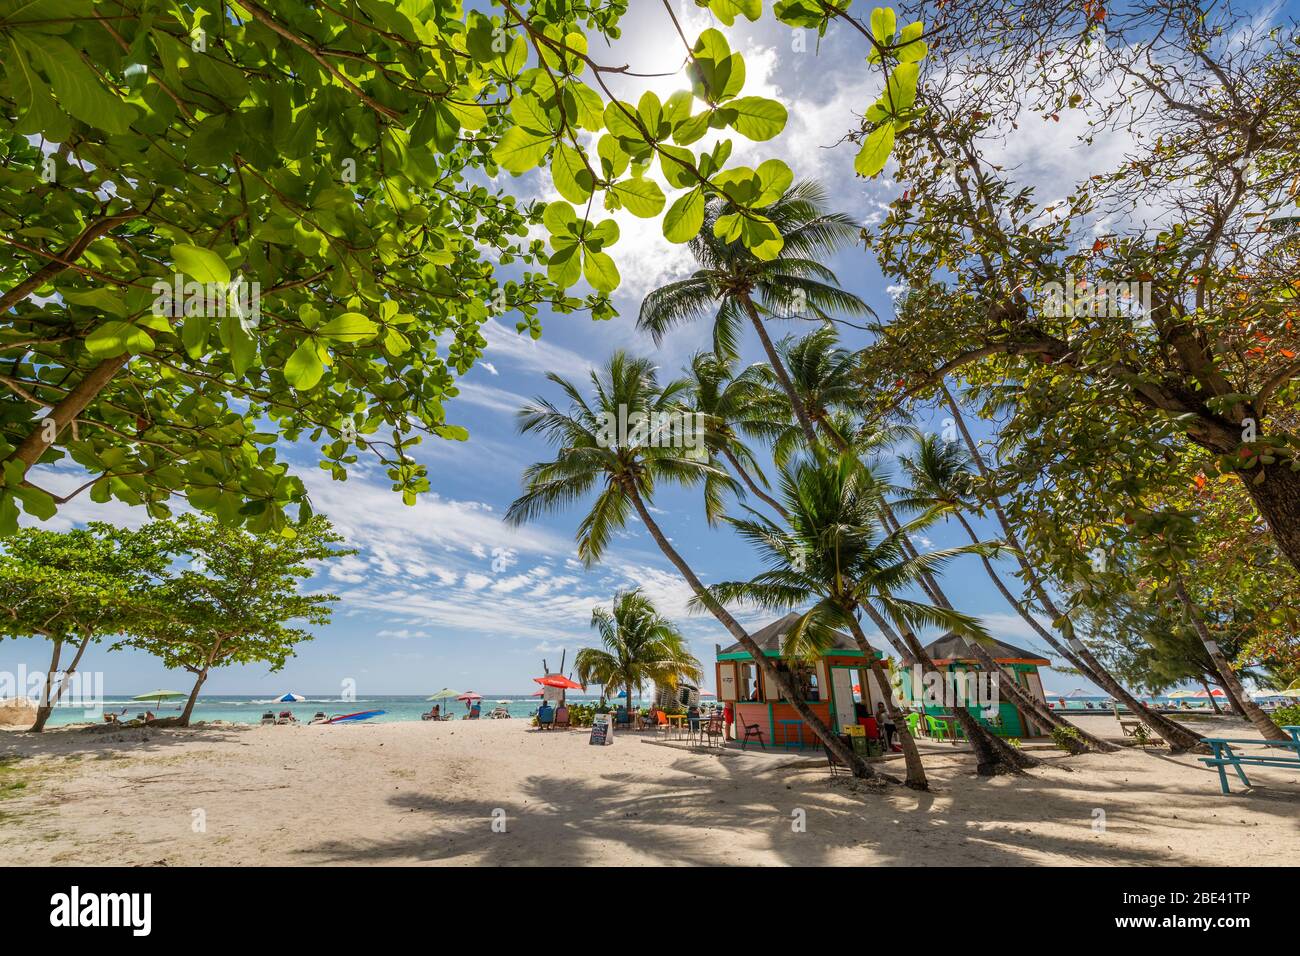 View of palm tree fringed Worthing Beach, Barbados, West Indies, Caribbean, Central America Stock Photo